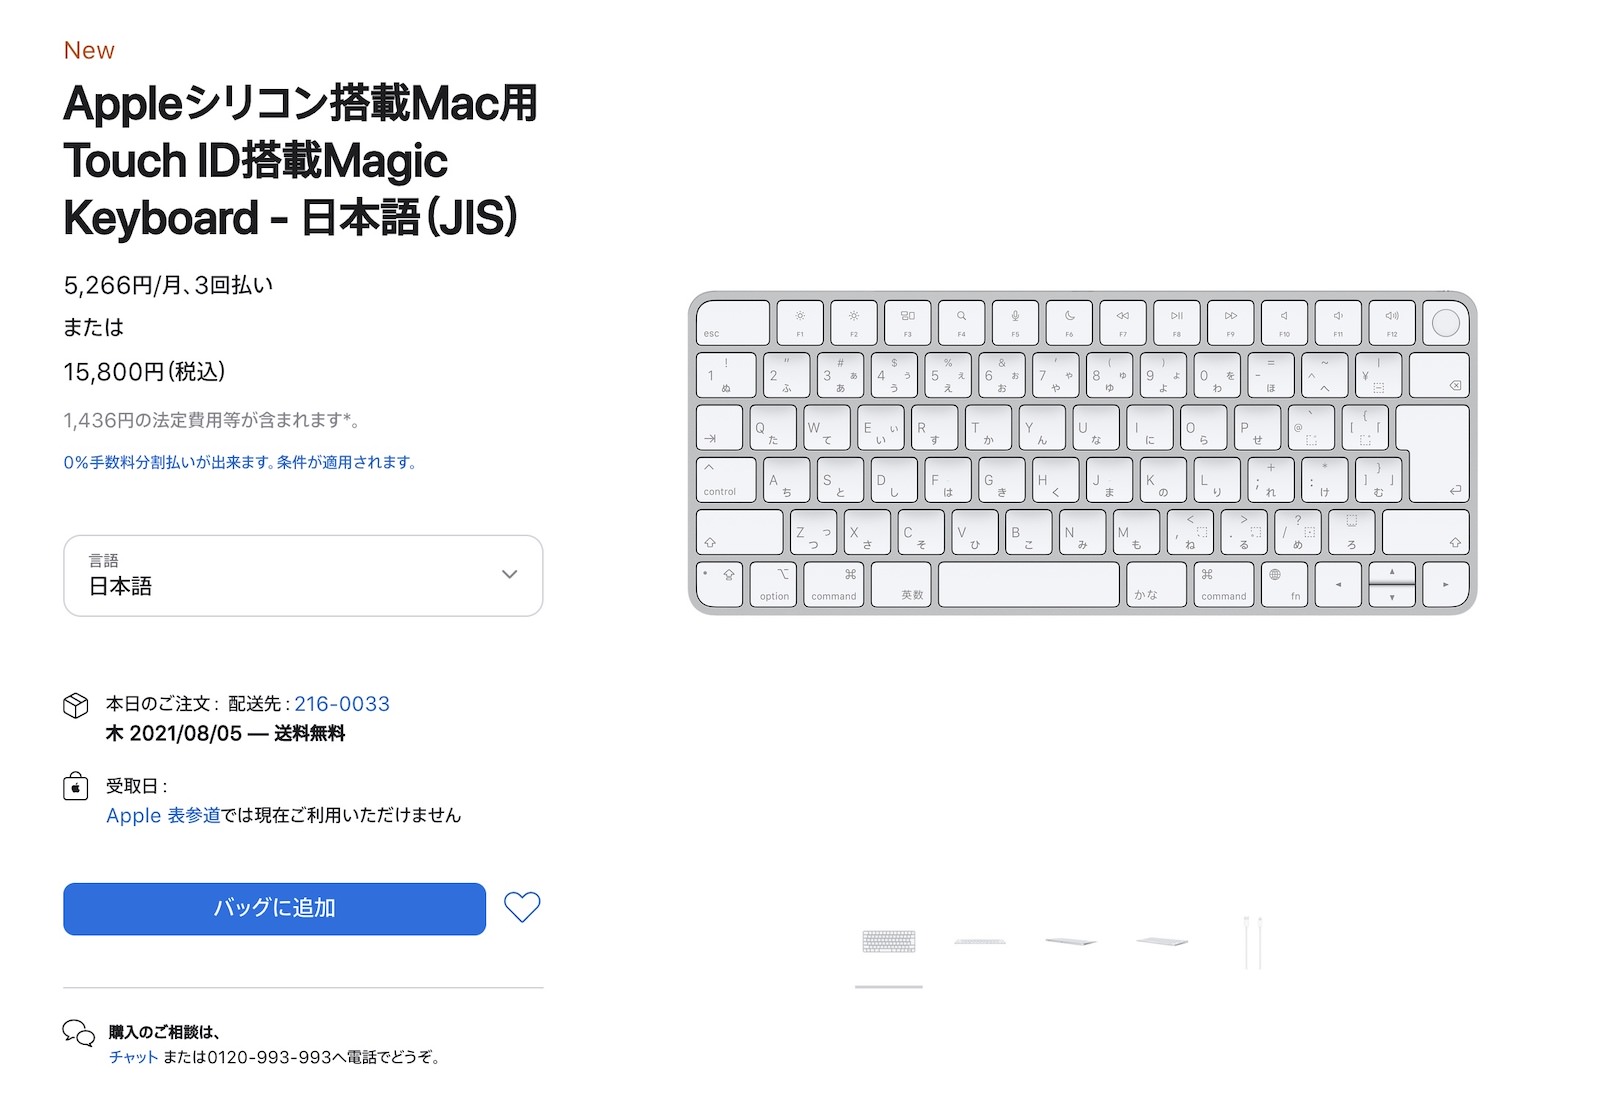 Touch id magic keyboard now on sale